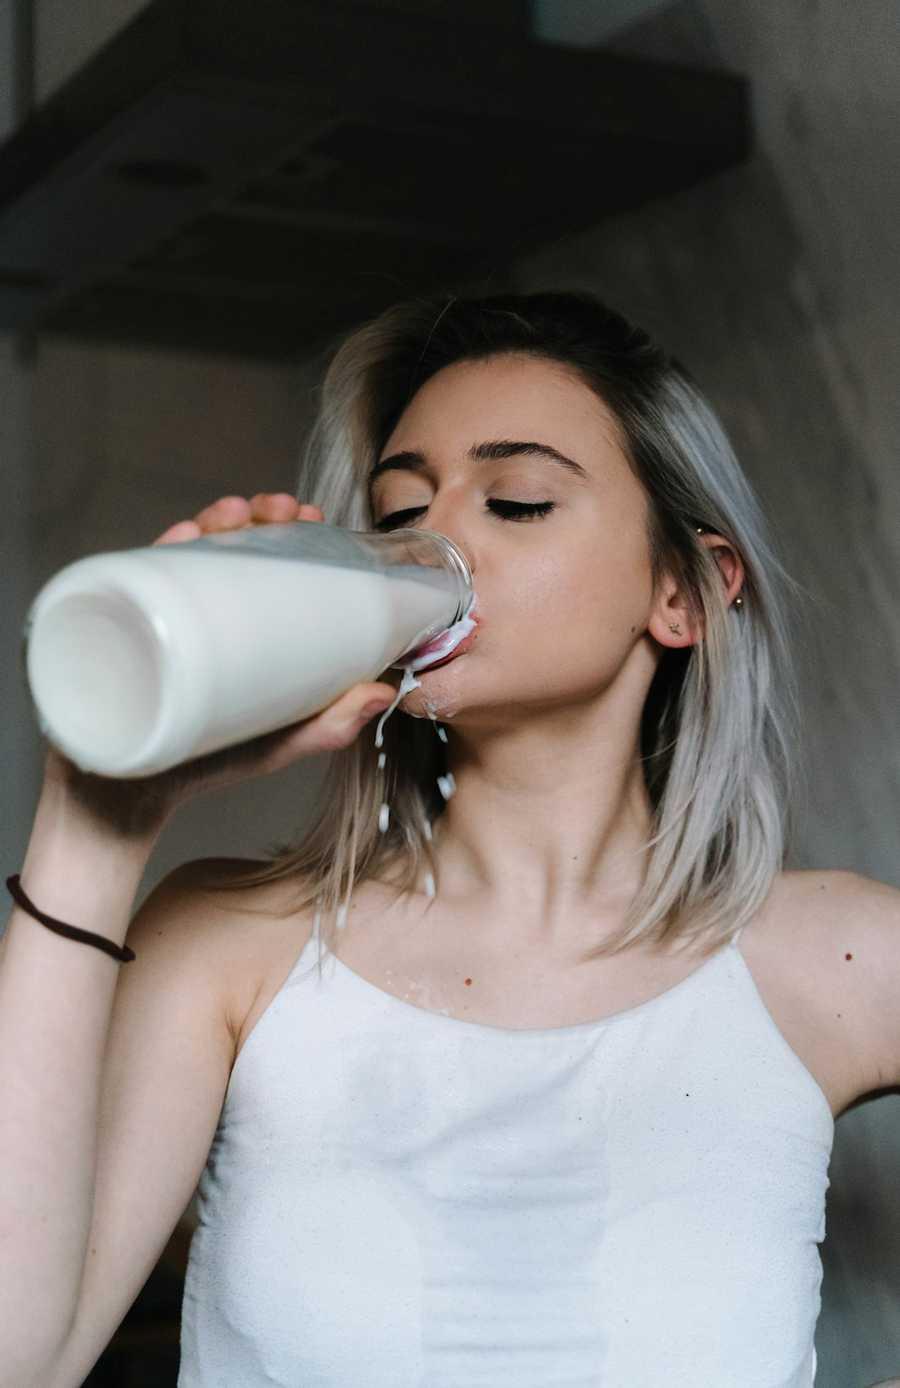 1Drinking milk is important for strong bones.